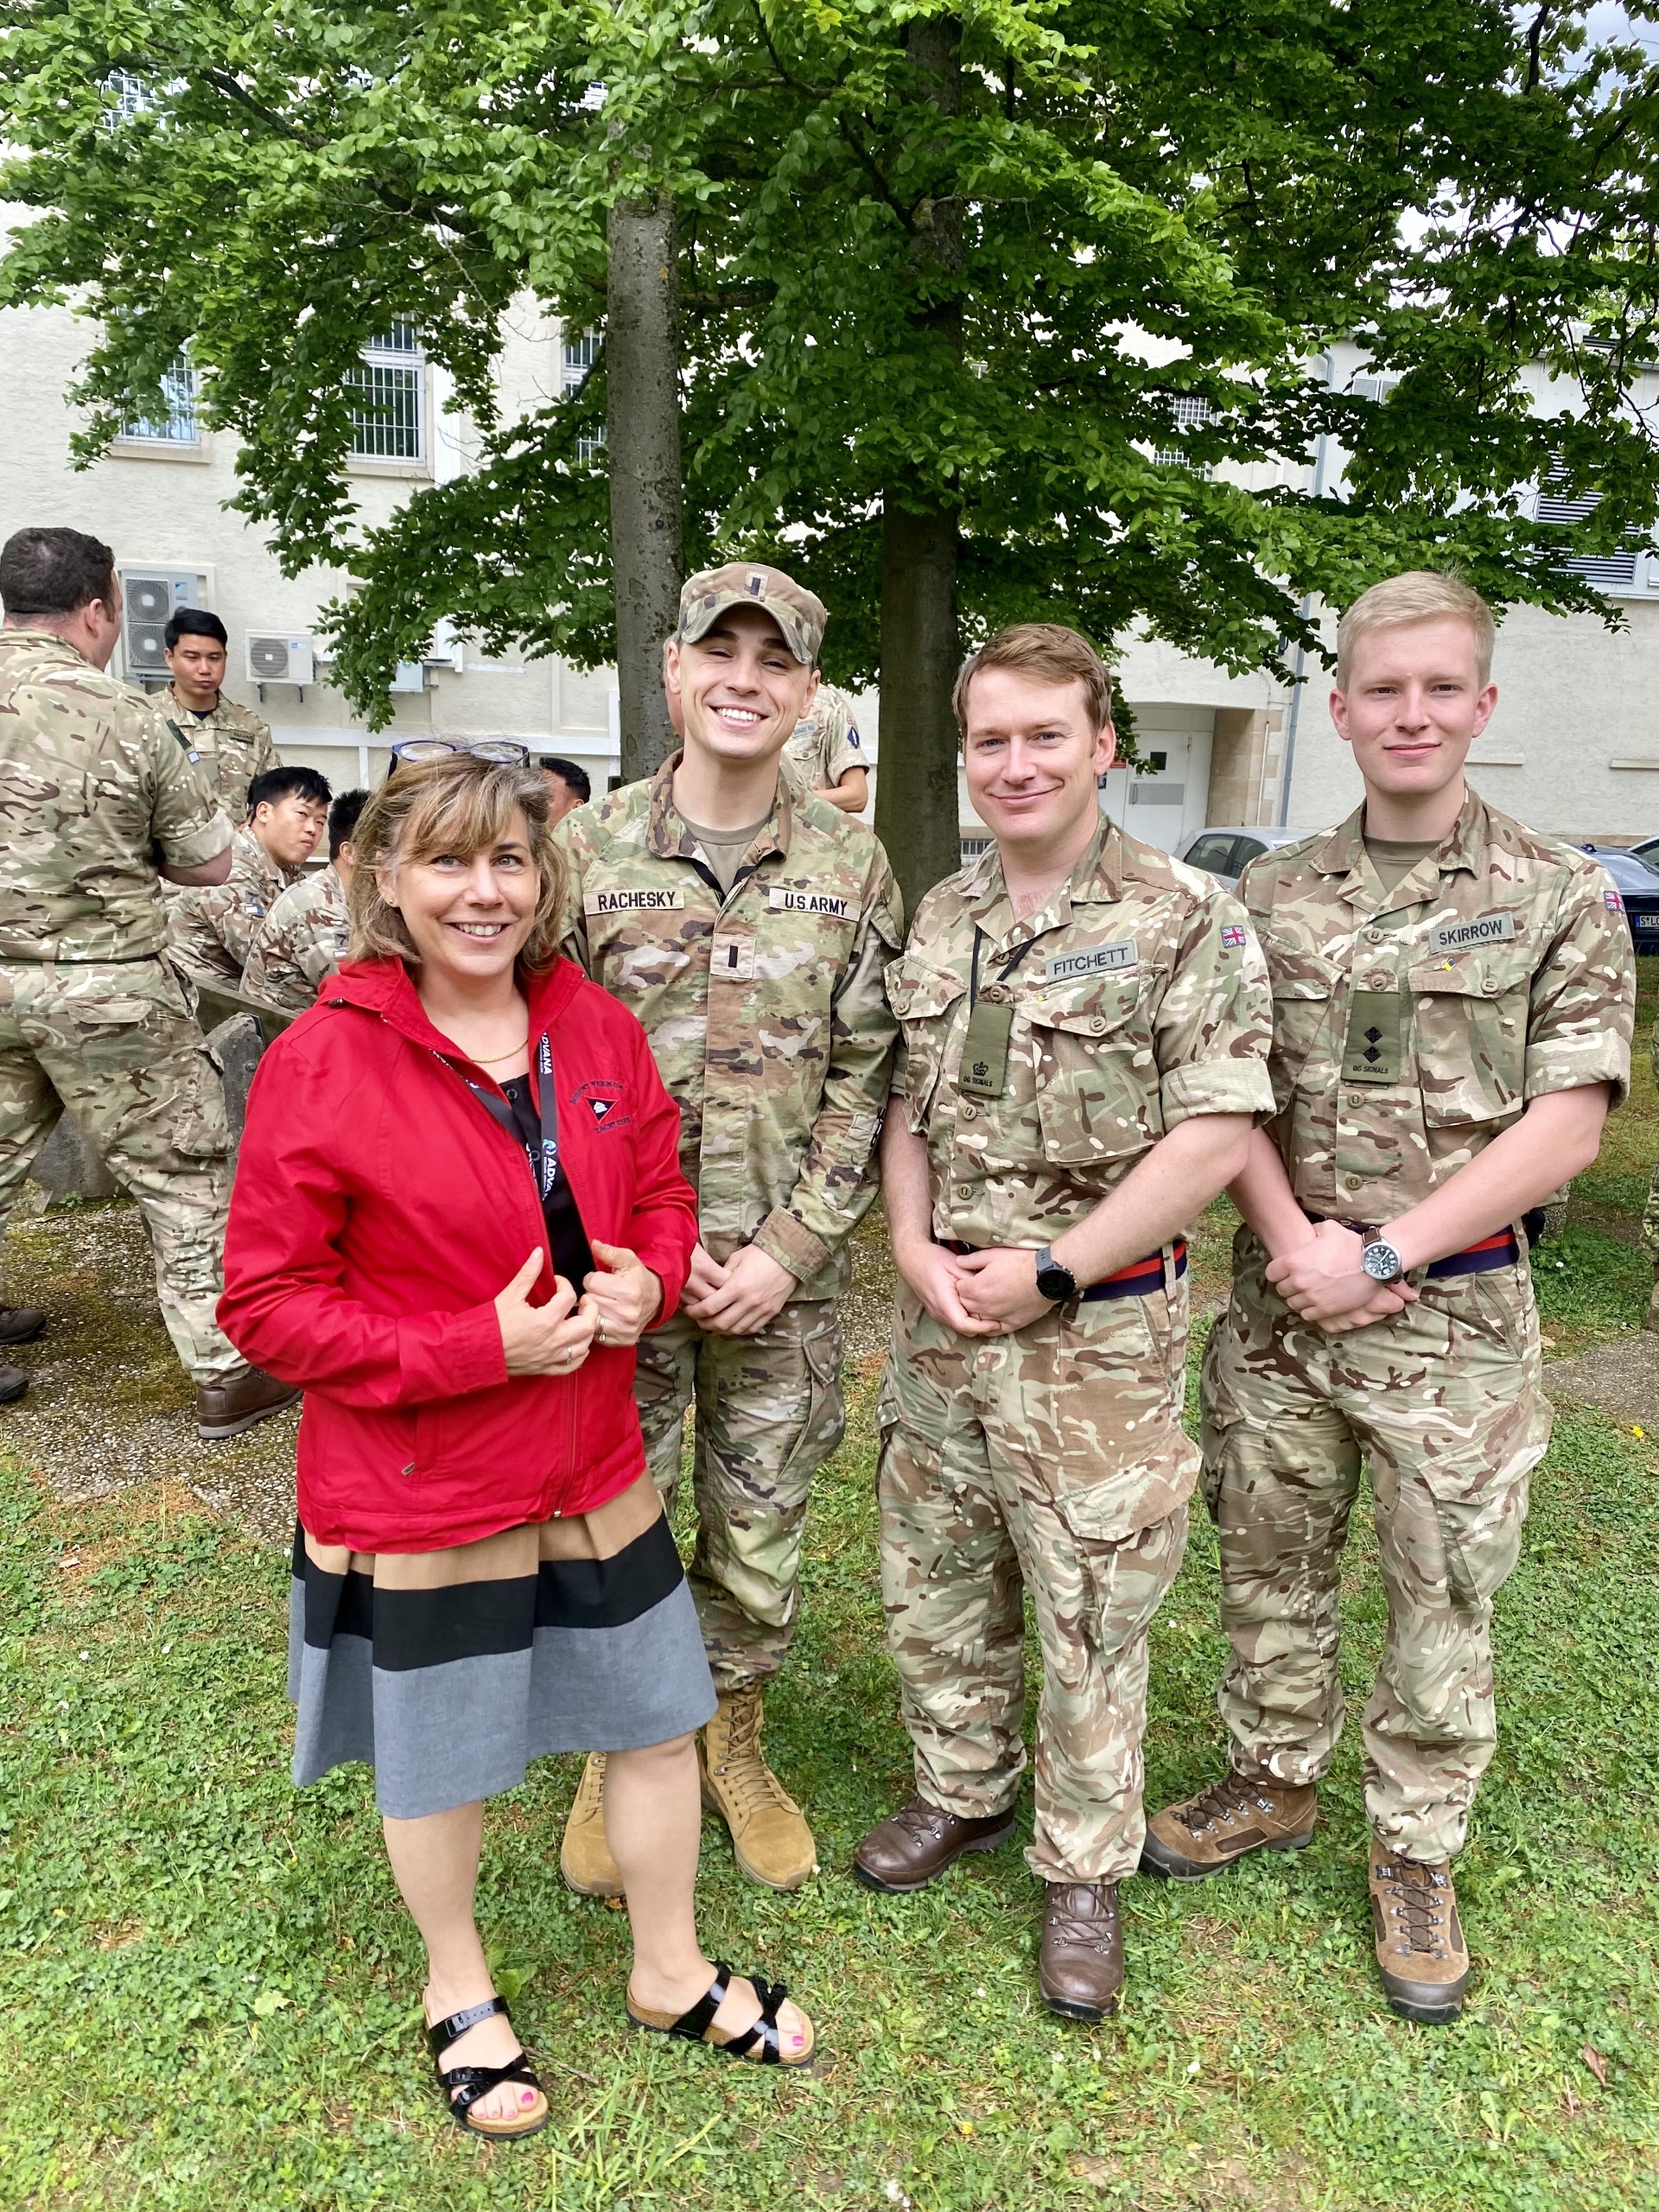 Kimberly at the headquarters of the United States European Command (EUCOM) with the International Donor Coordination Center and Security Assistance Group Ukraine (SAG-U).